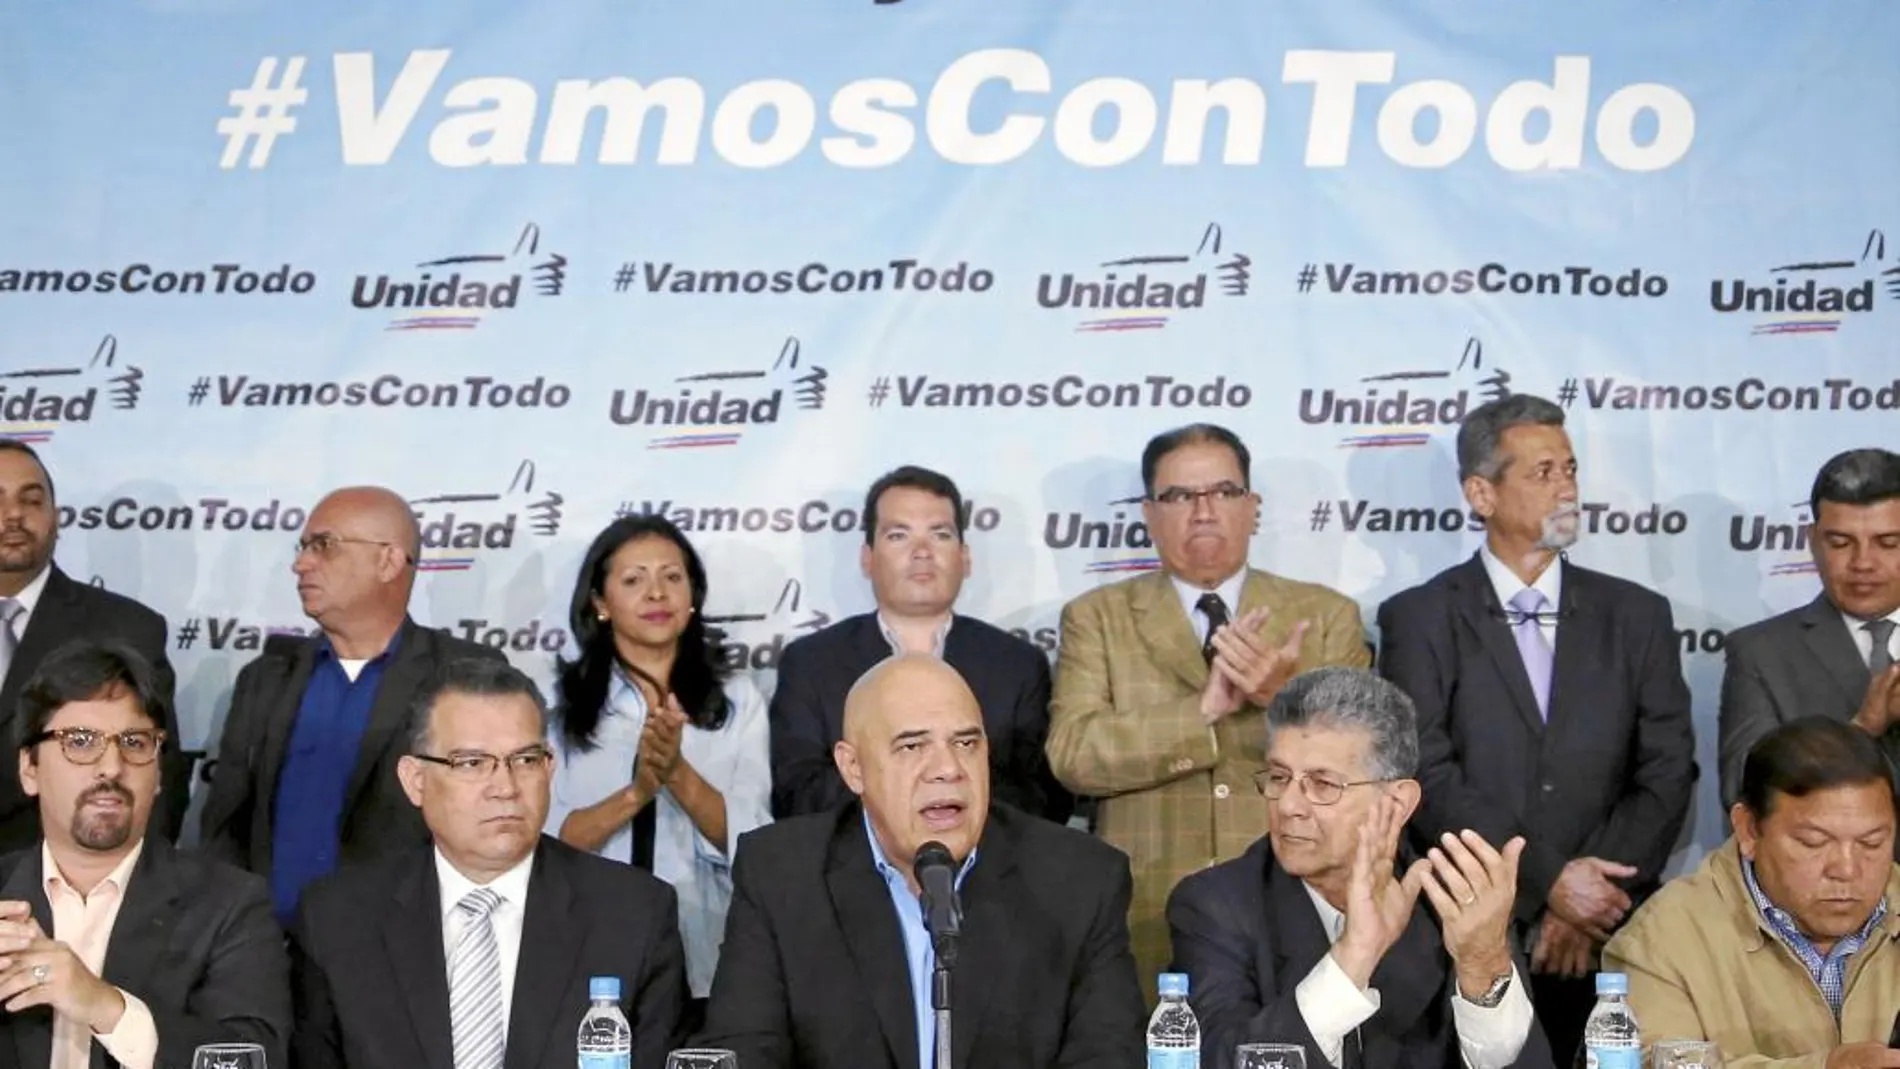 Jesus Torrealba (C), secretary of Venezuela's coalition of opposition parties (MUD), talks to the media next to his fellow politicians during a news conference in Caracas March 8, 2016. The message on the backdrop reads: "With the people and the constitution, we are going with everything". REUTERS/Carlos Garcia Rawlins